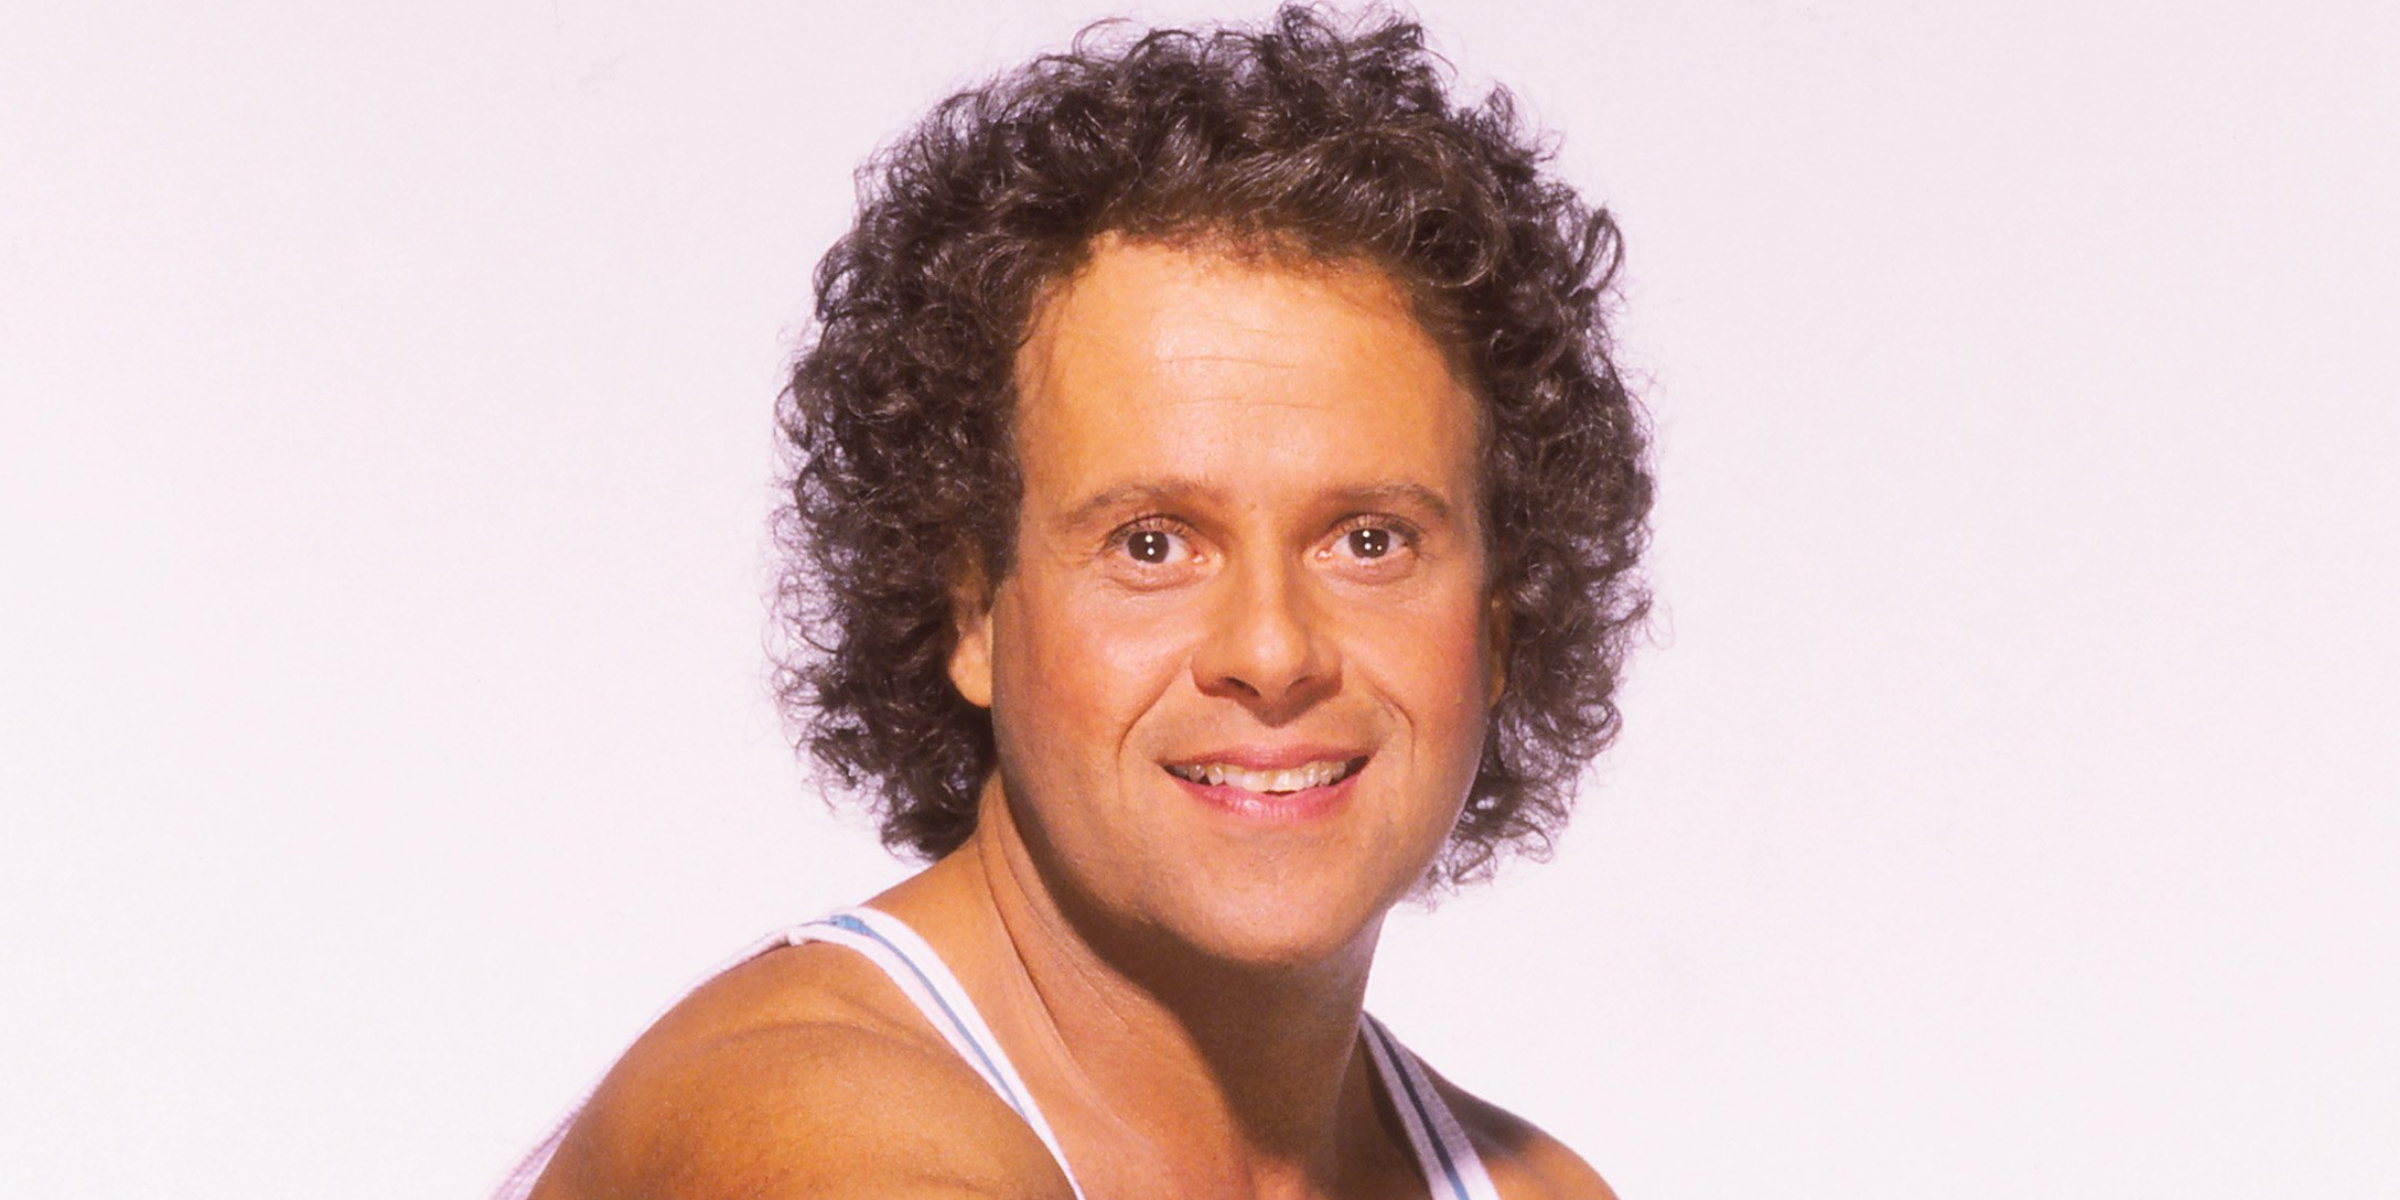 Richard Simmons | Source: Getty Images